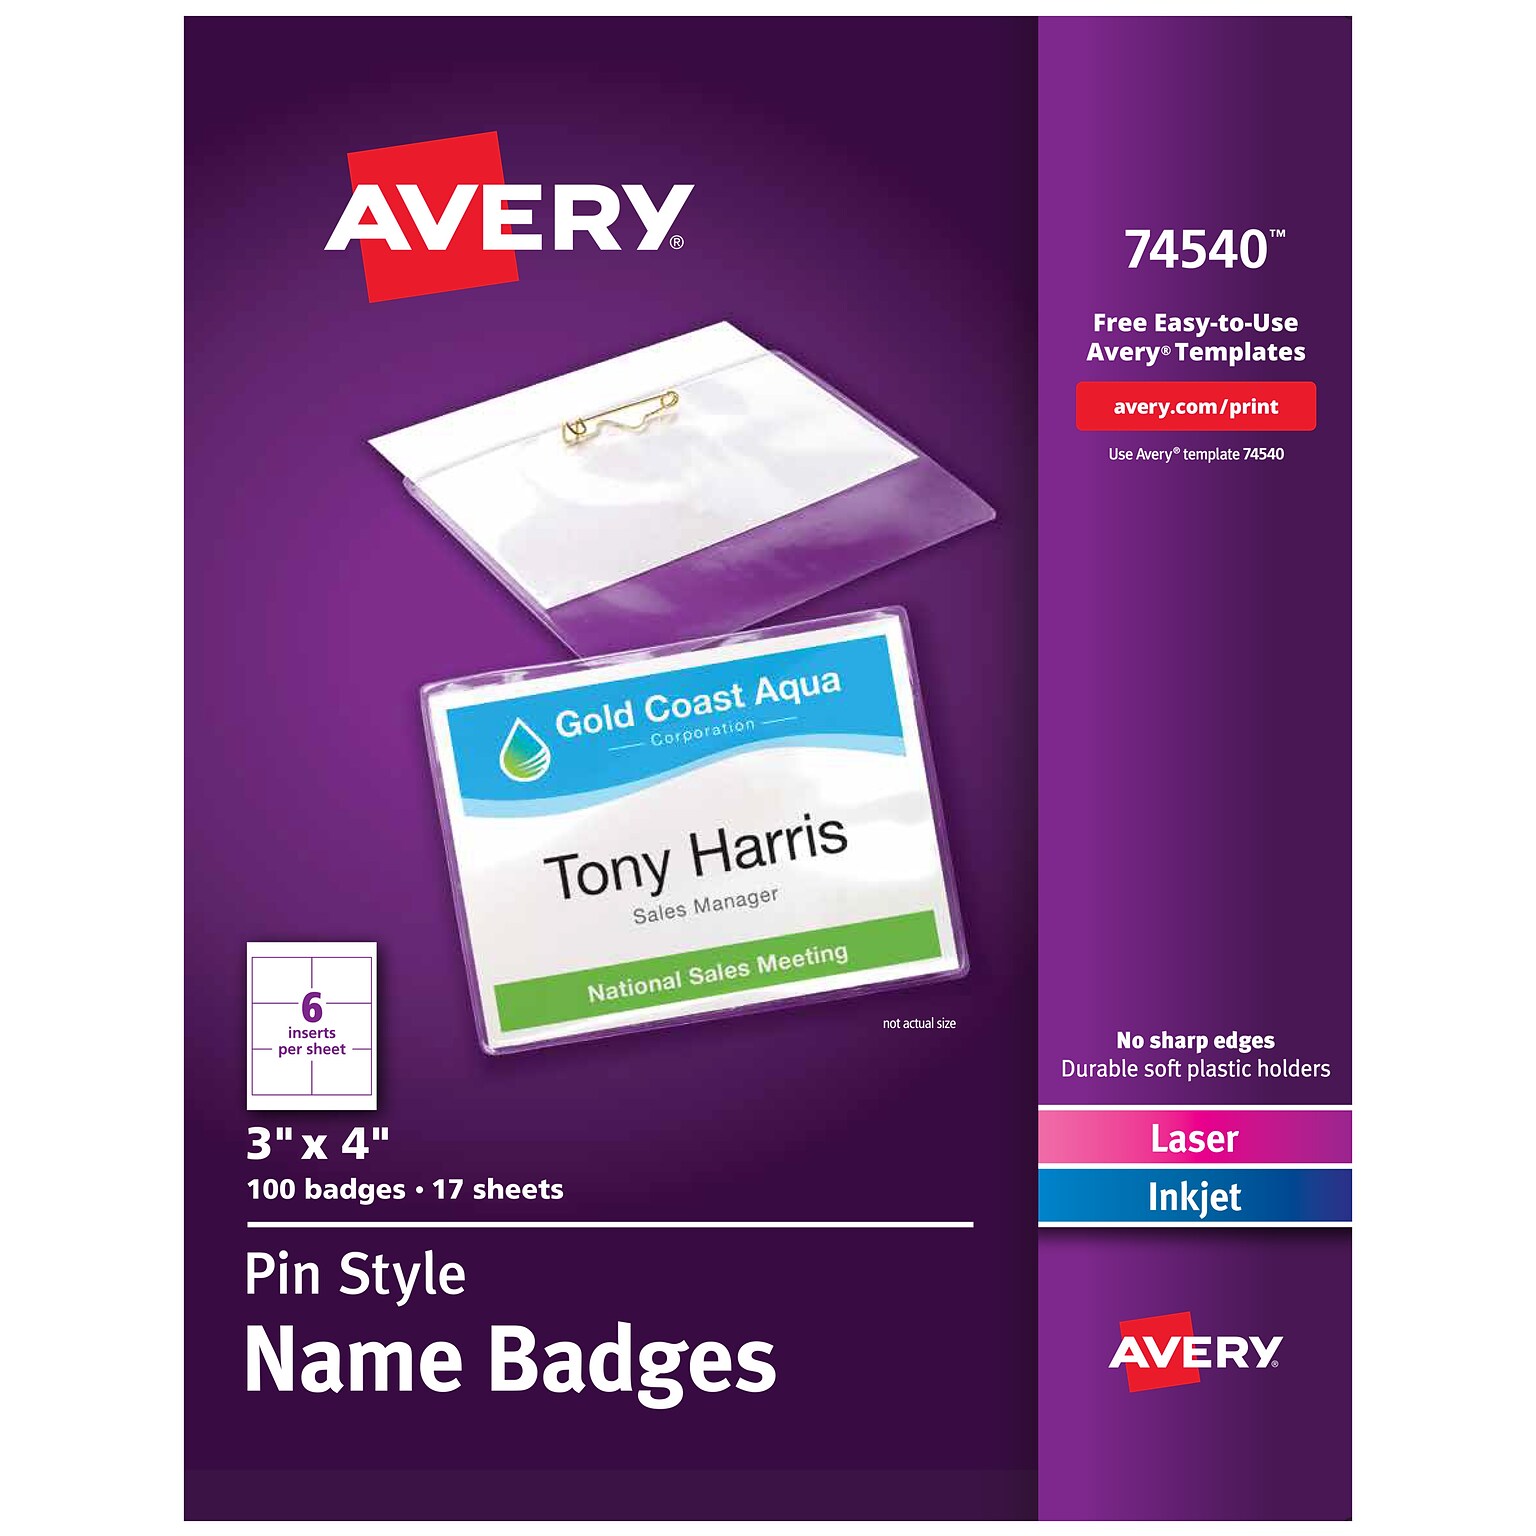 Avery Pin Style Laser/Inkjet Name Badge Kit, 3 x 4, Clear Holders with White Inserts, 100/Box (74540)